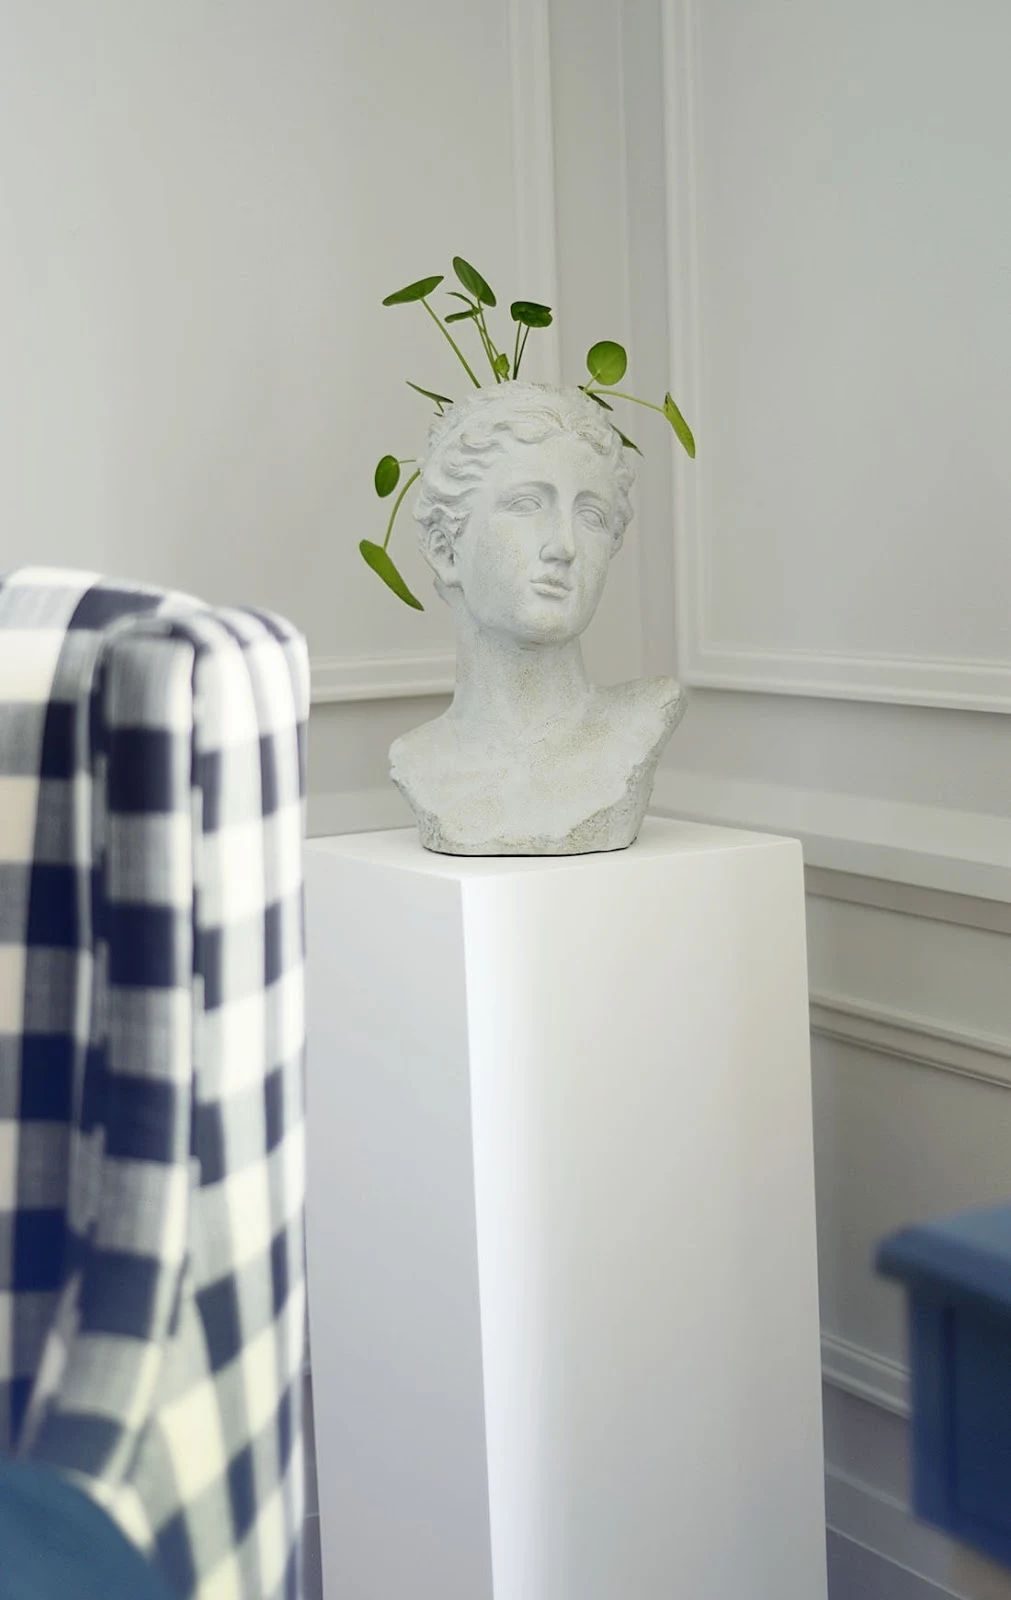 grecian bust vase, bust planter, planter on pedestal, moulding on walls, farrow and ball ammonite paint